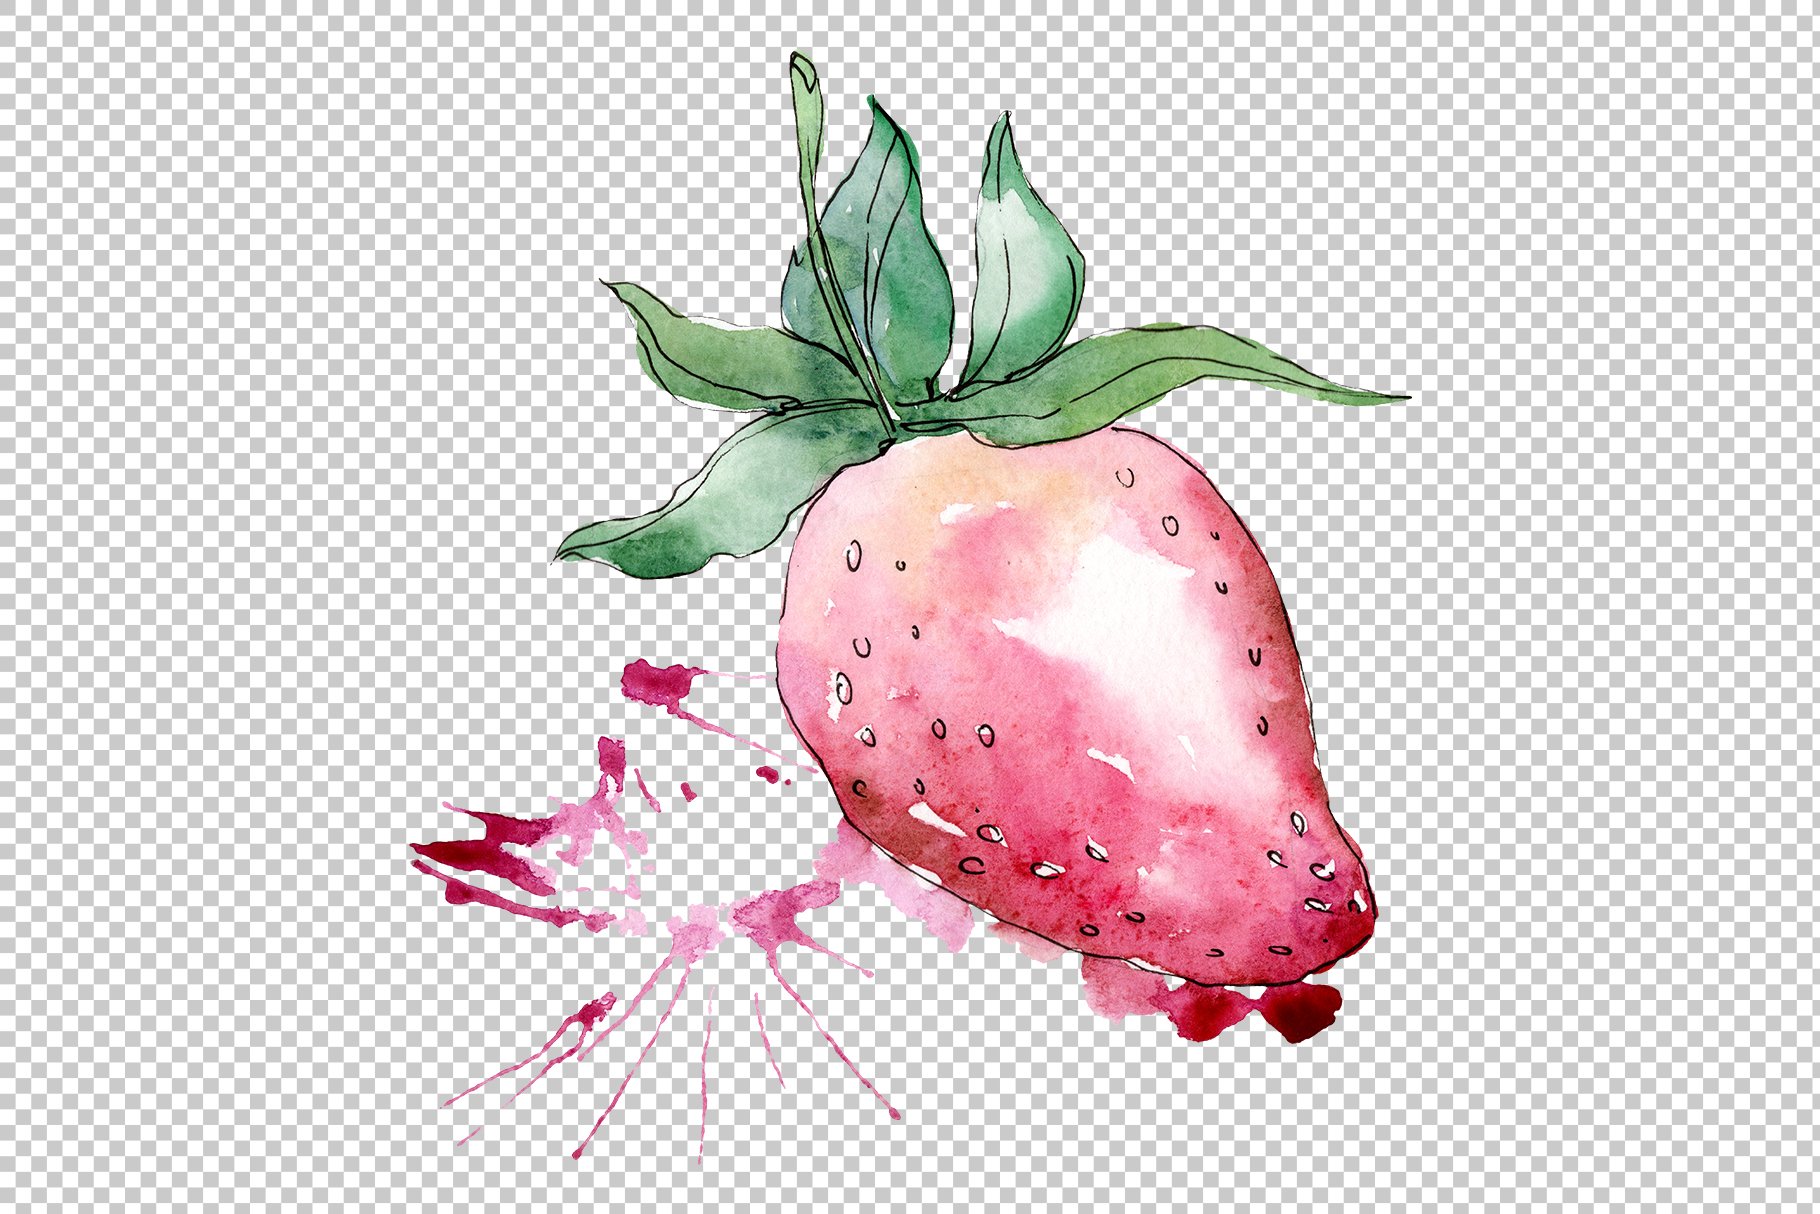 Lonely watercolor strawberry.